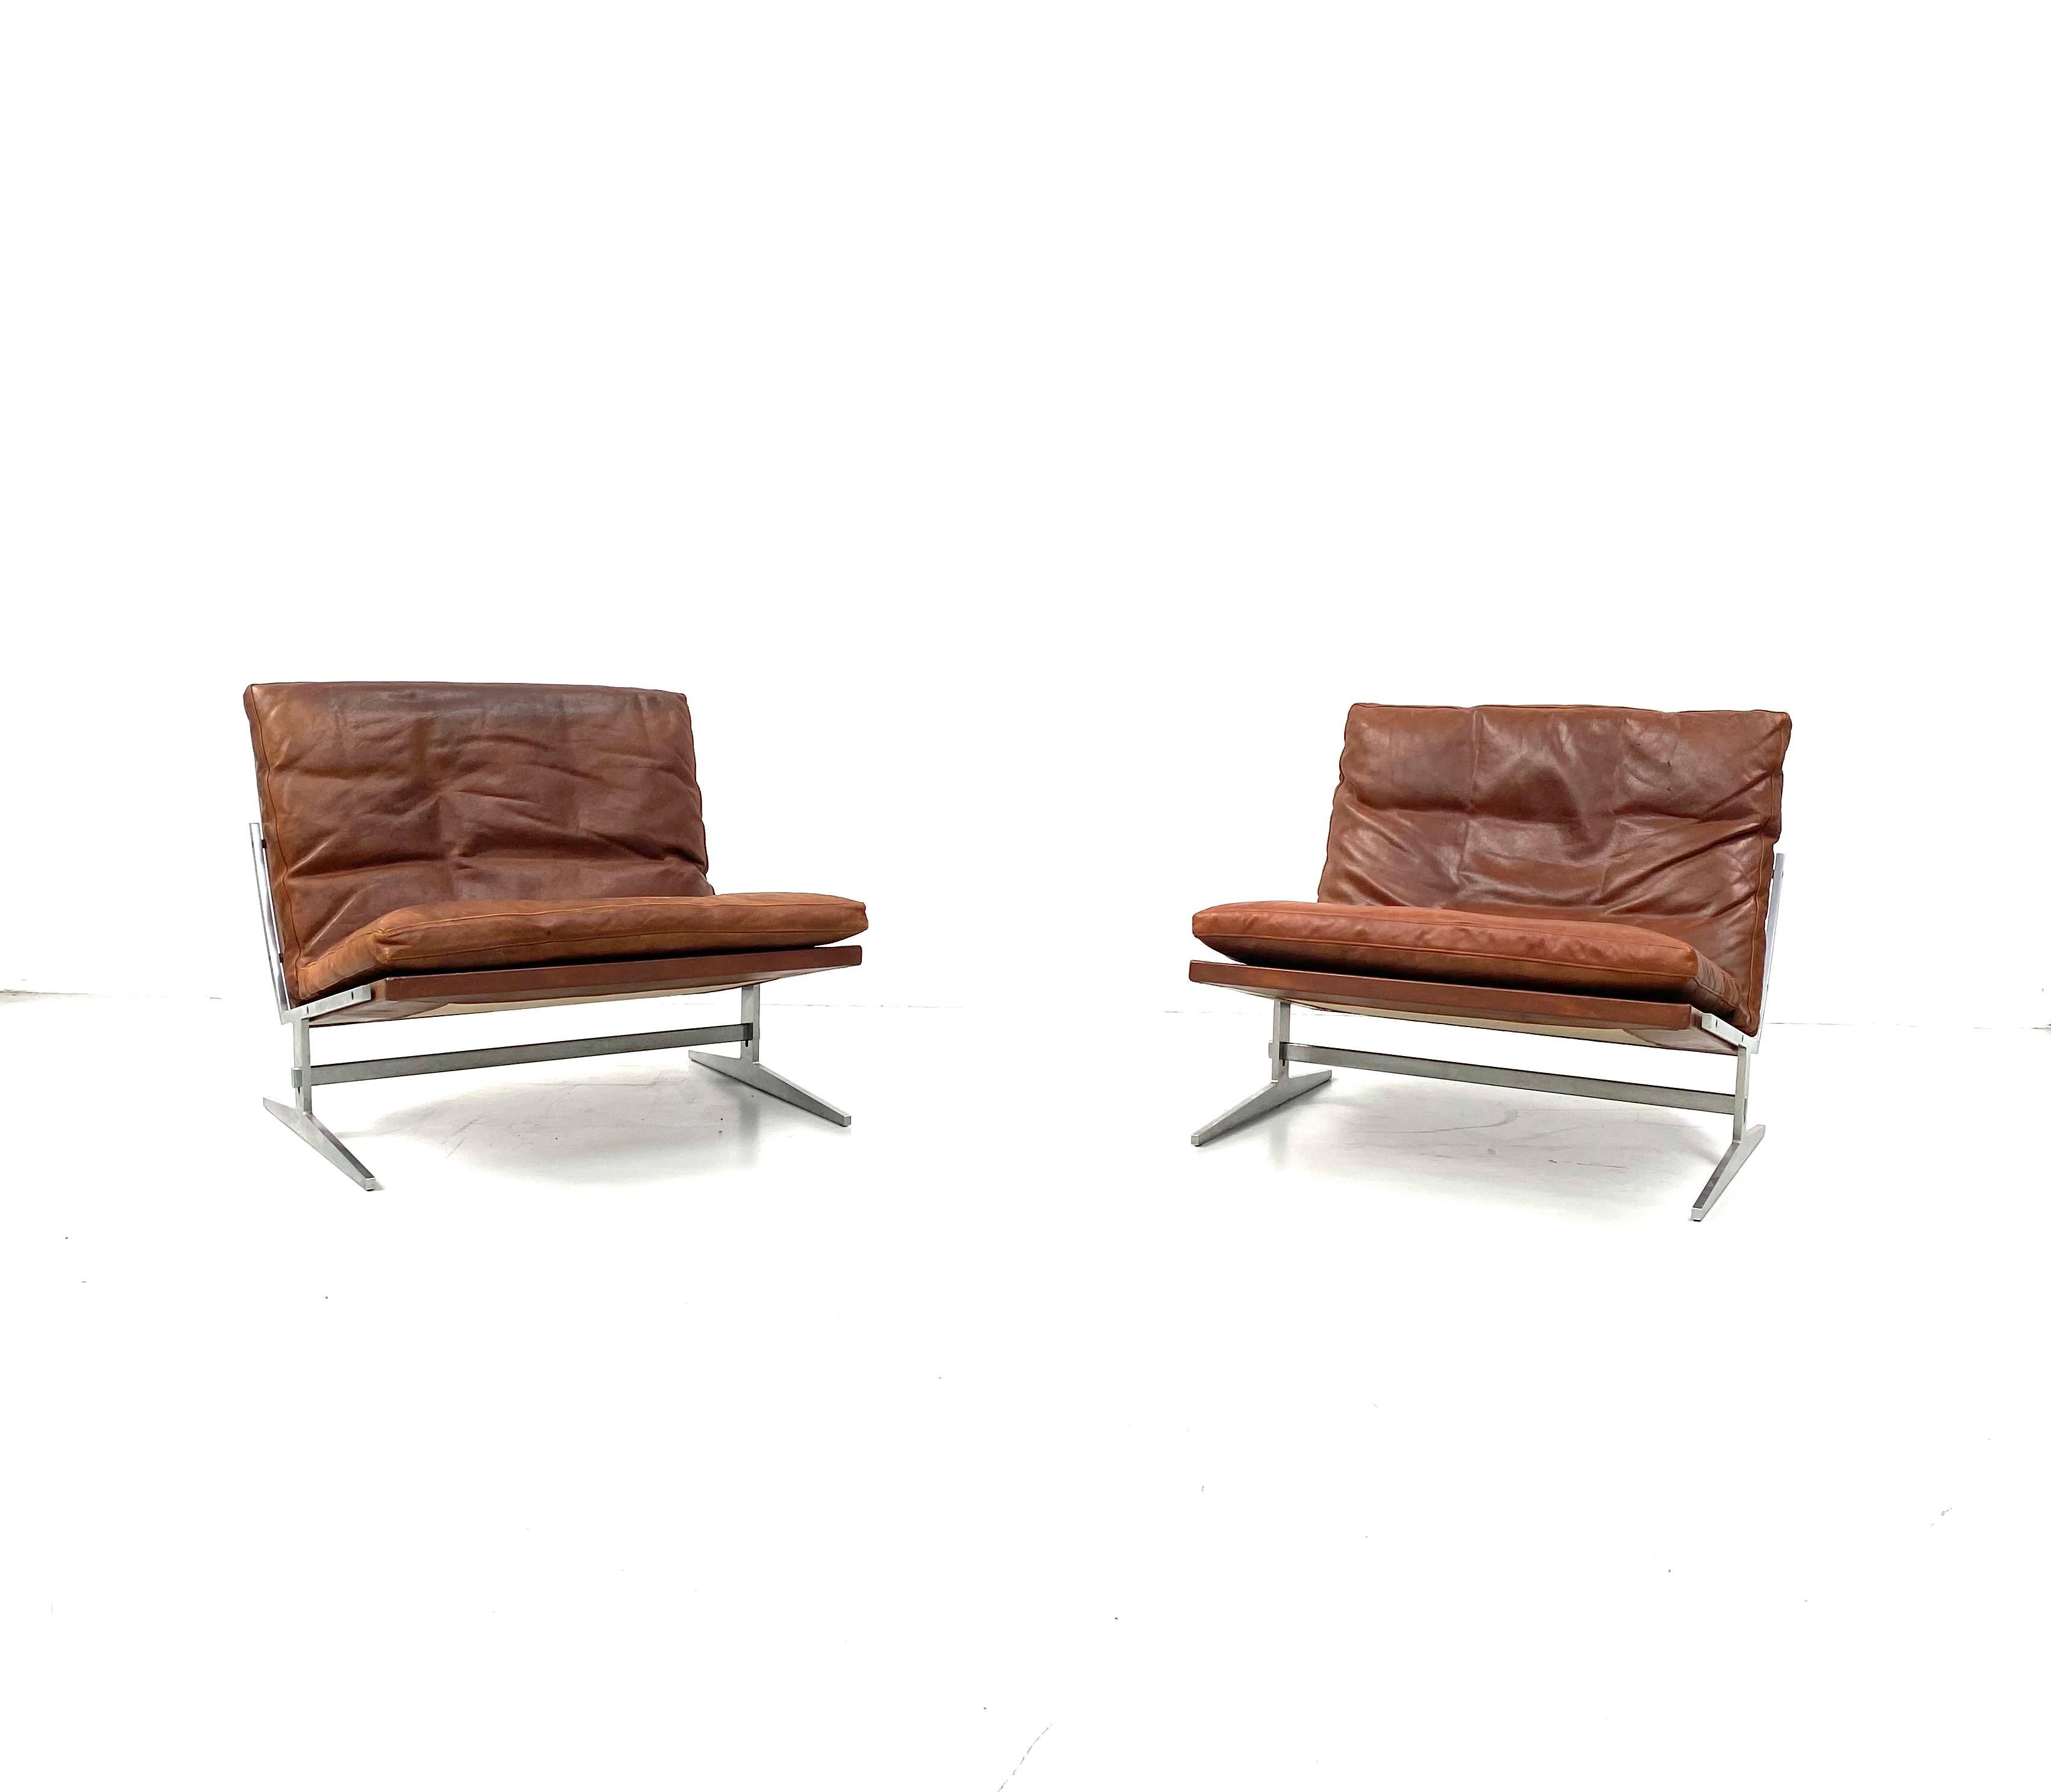 These set of 2 BO-561 Lounge chairs are designed by Preben Juhl Fabricius and Jorgen Kastholm in the sixties. 
The 2 Danish designers met each other in the 50s but start only working together in the 60s. While Fabricius was an educated cabinetmaker